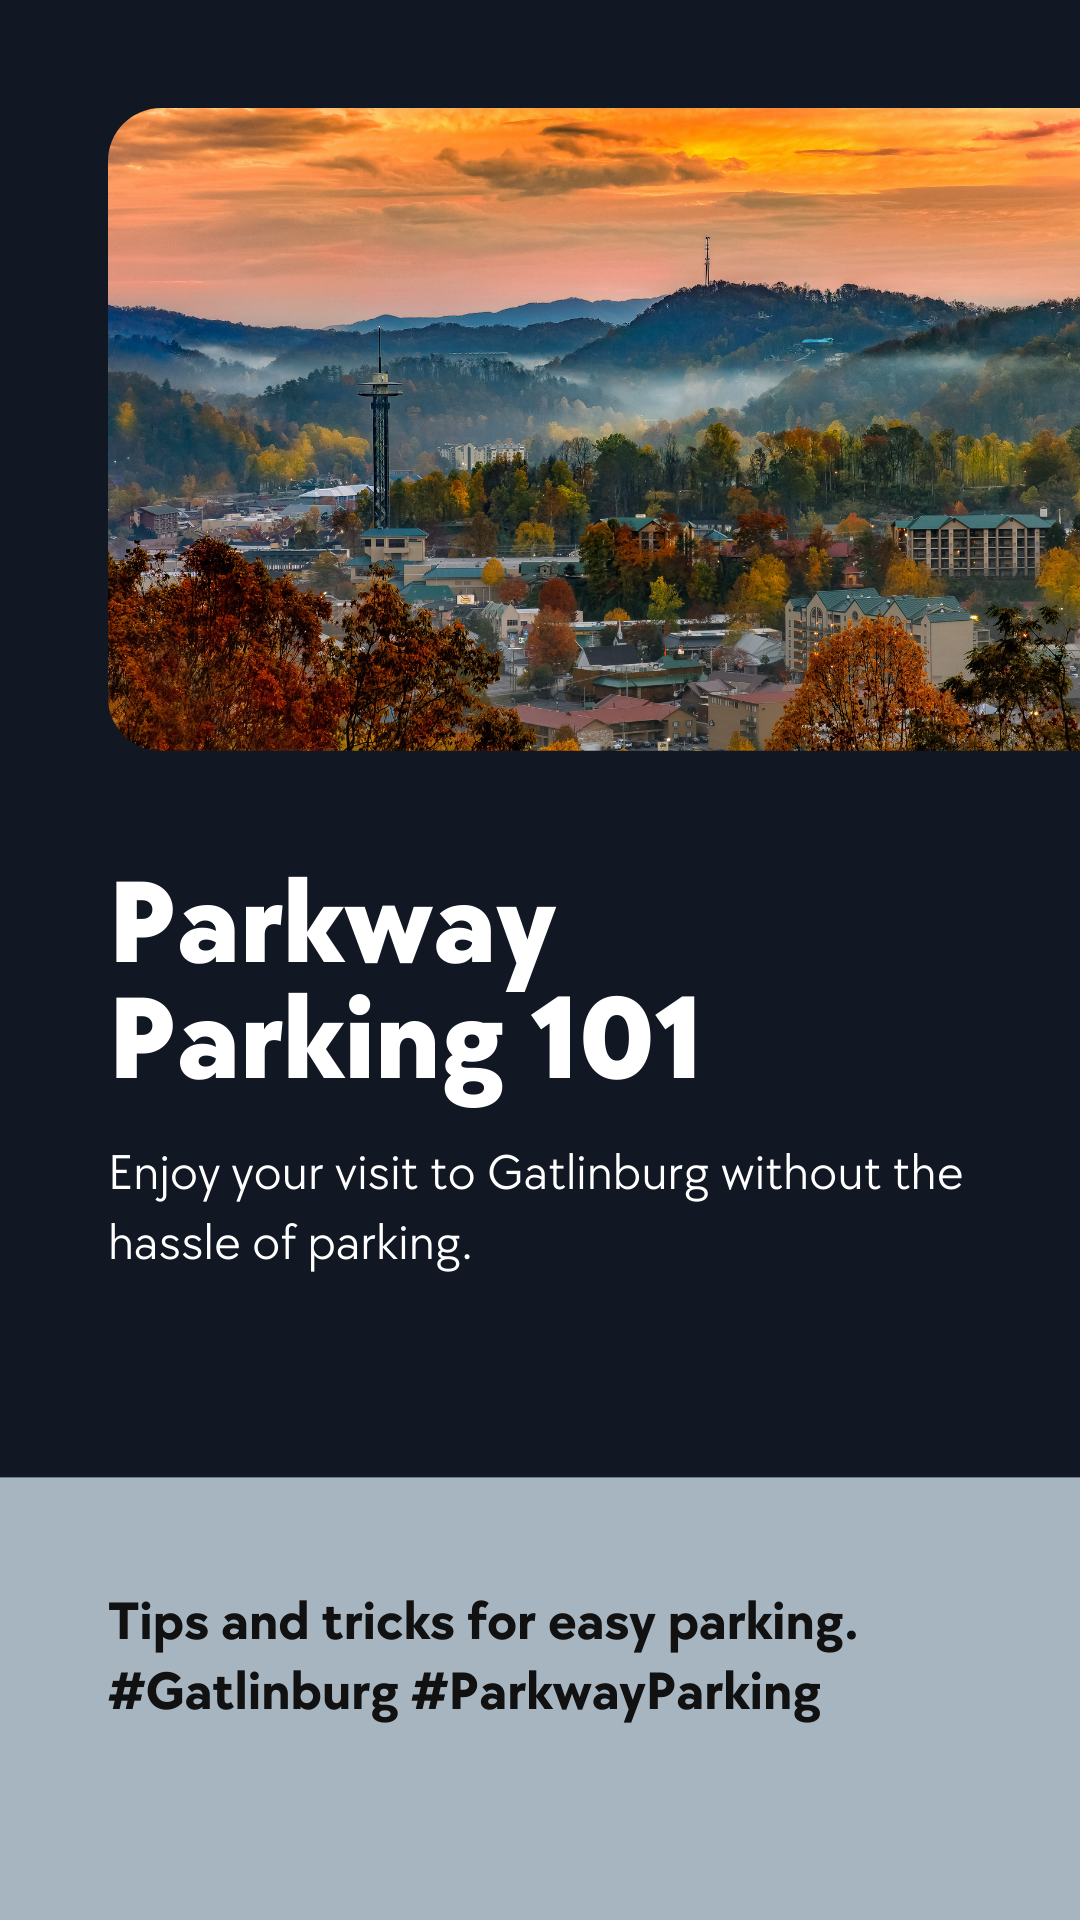 Parking on the Parkway in Gatlinburg: Navigating Your Way Through the Heart of the Smokies